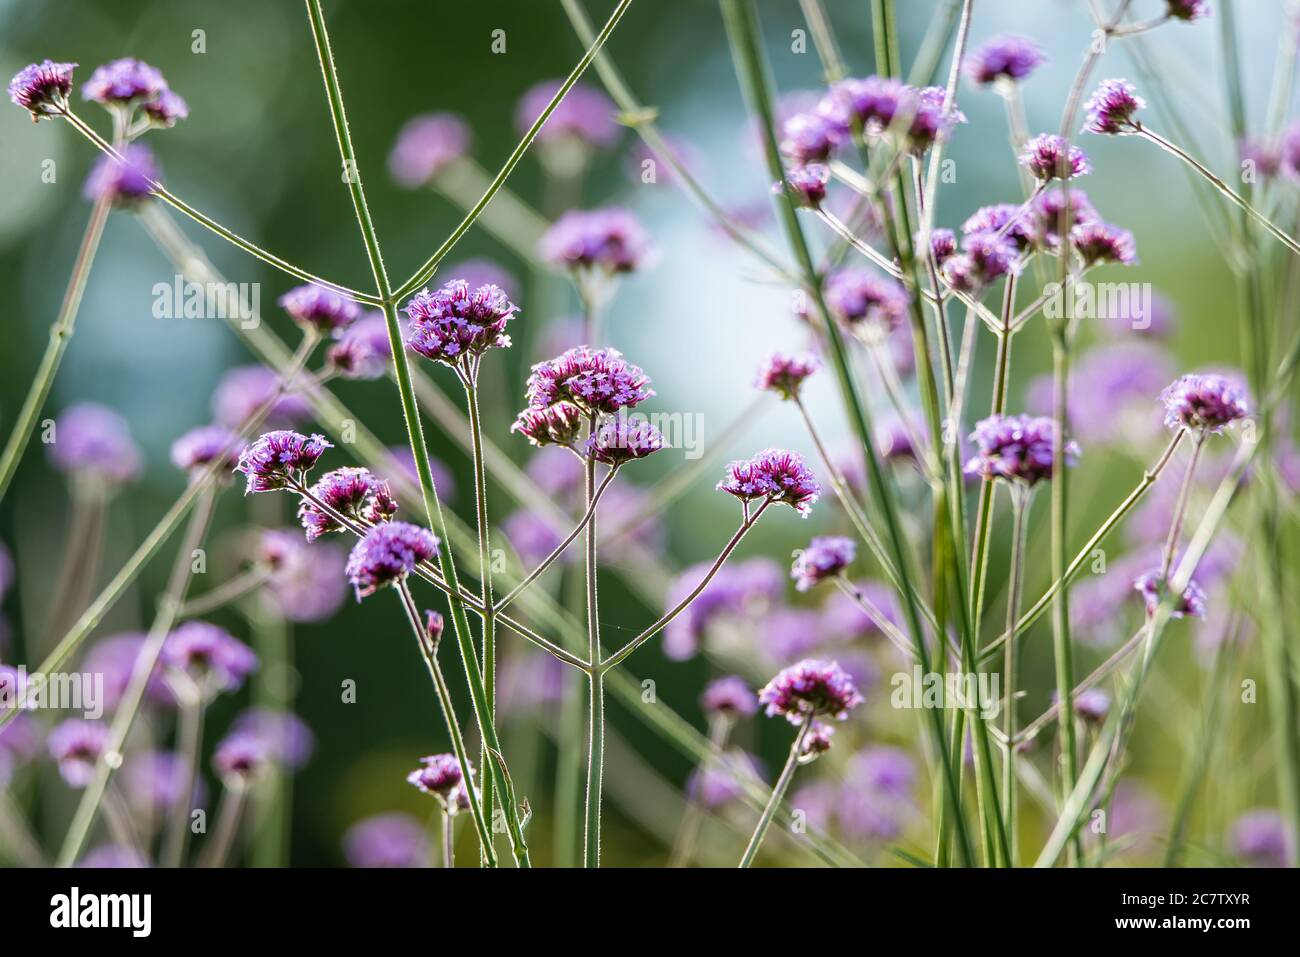 The Verbena brasiliensis purplish flowers are grouped closely together Stock Photo